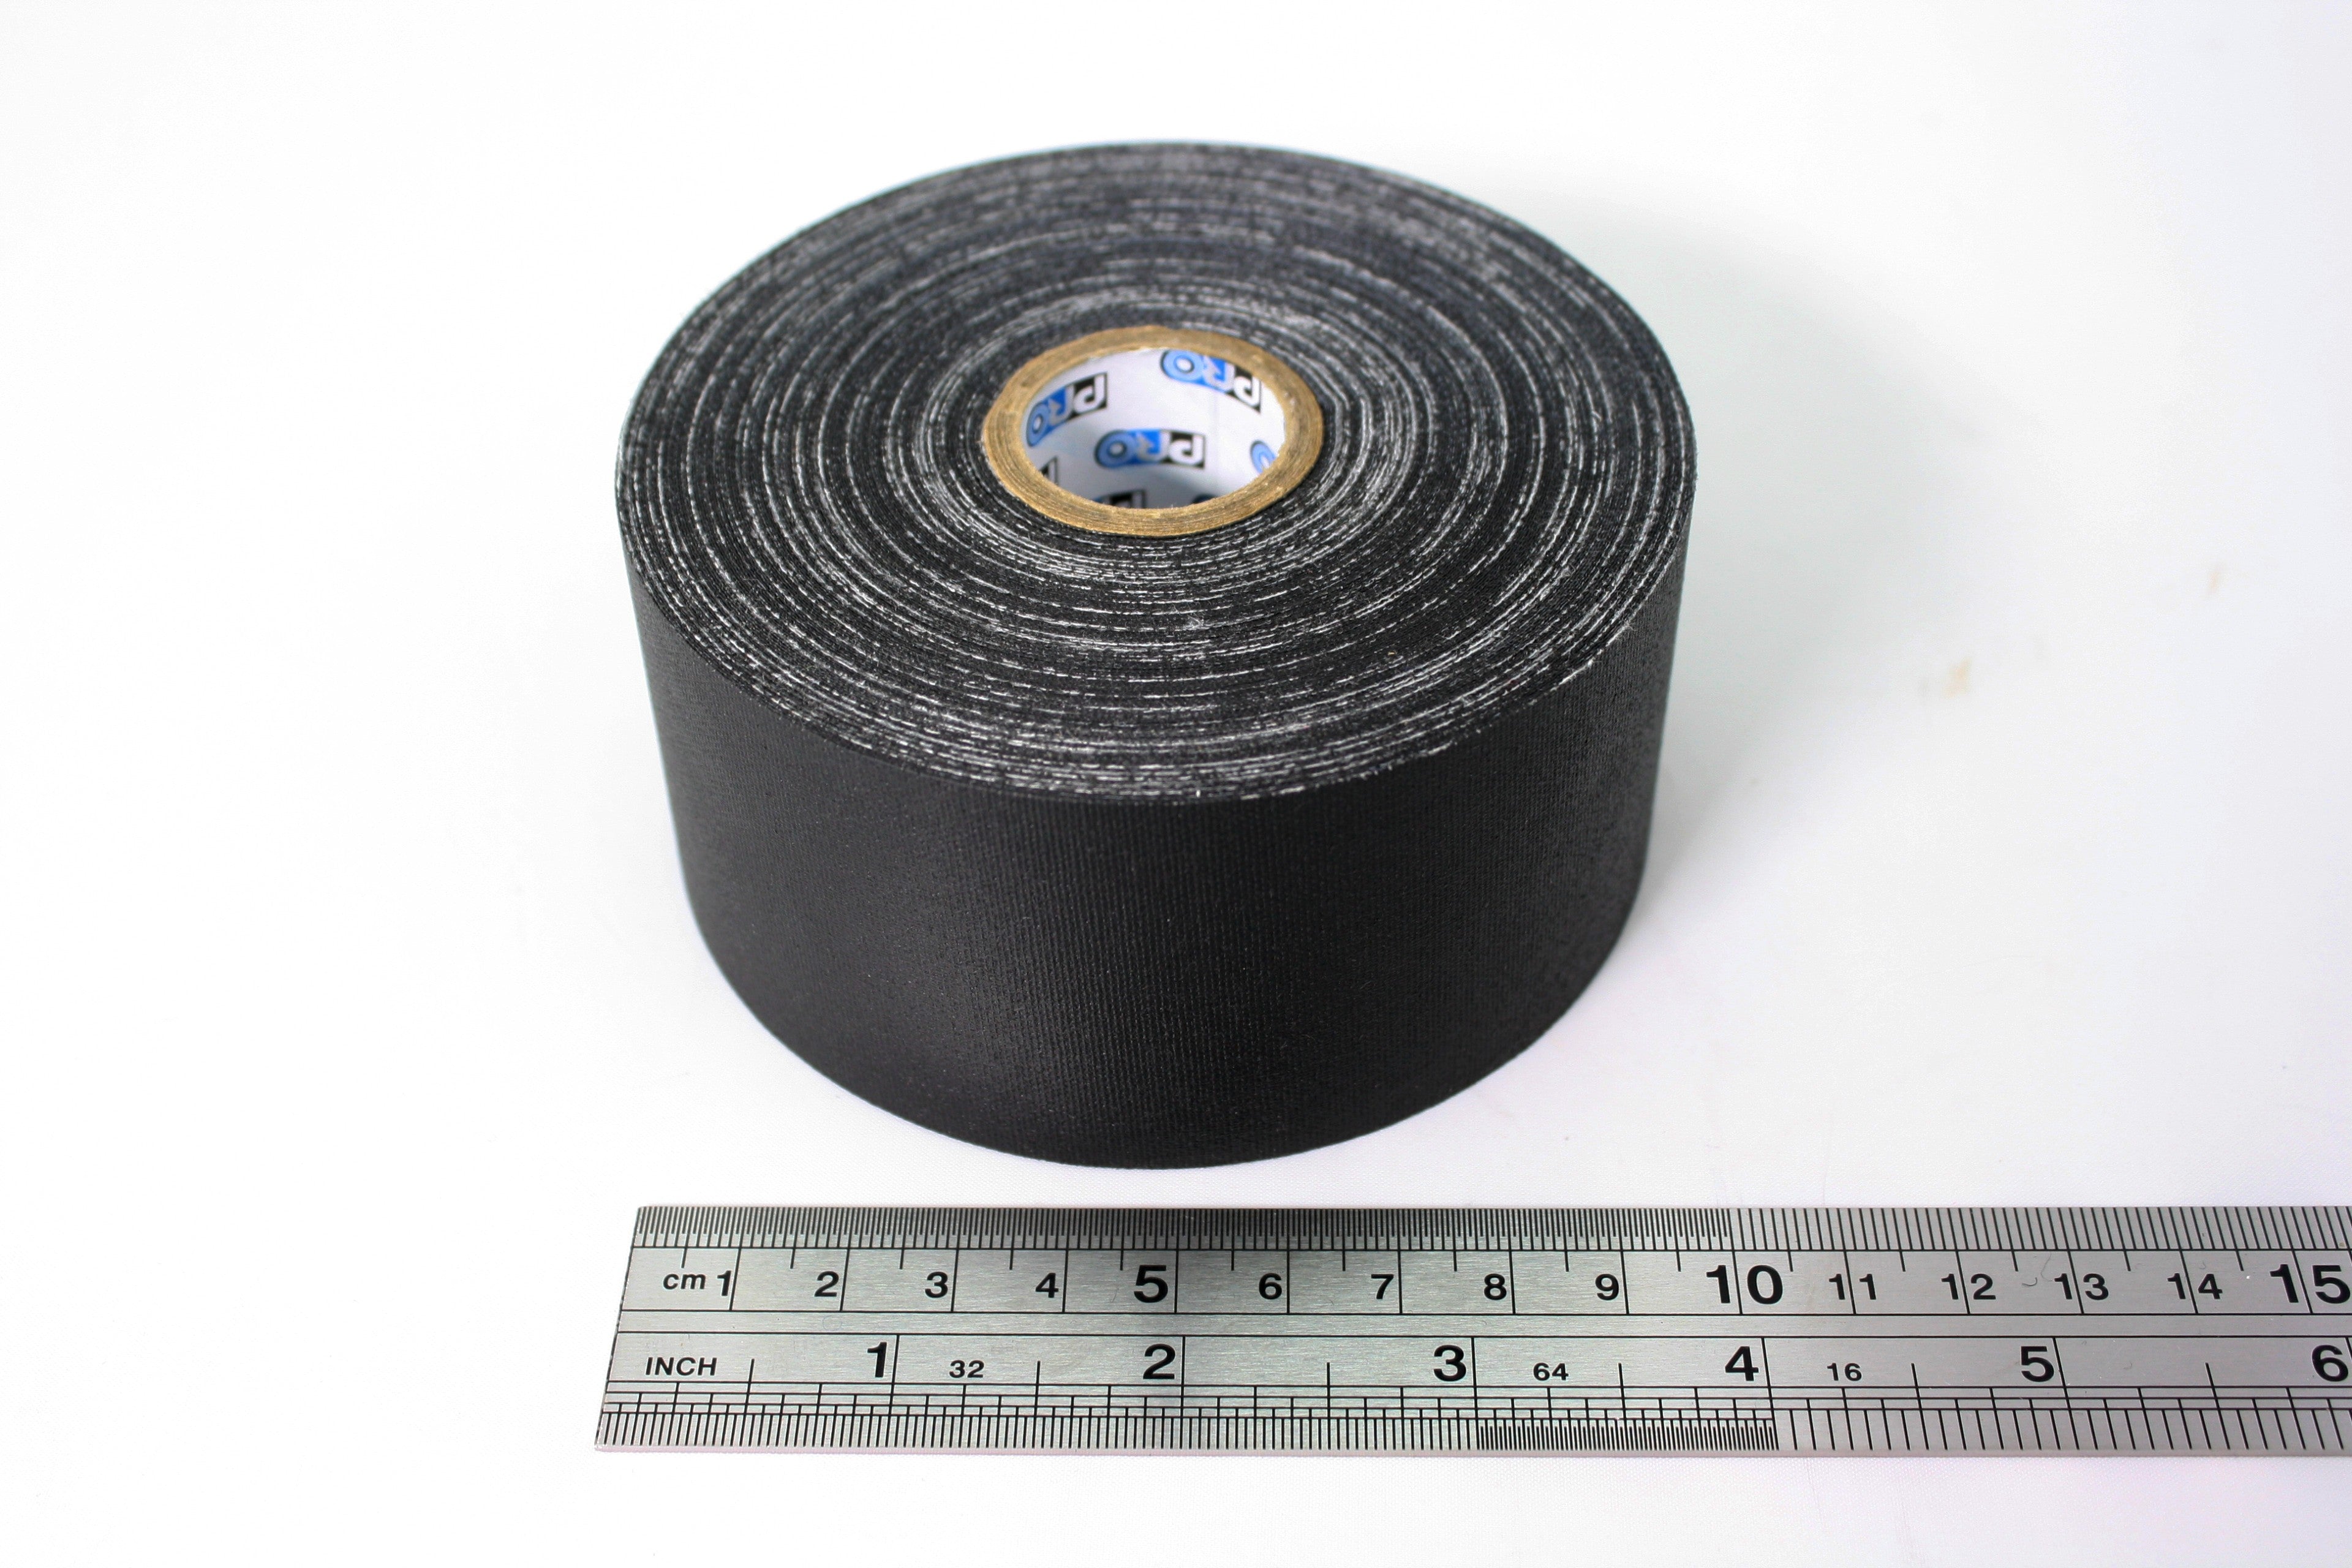 A close up of a 2" roll of Pro Gaff tape, small core, next to a ruler. The image shows that the widest part of the tape roll is just under 10cm